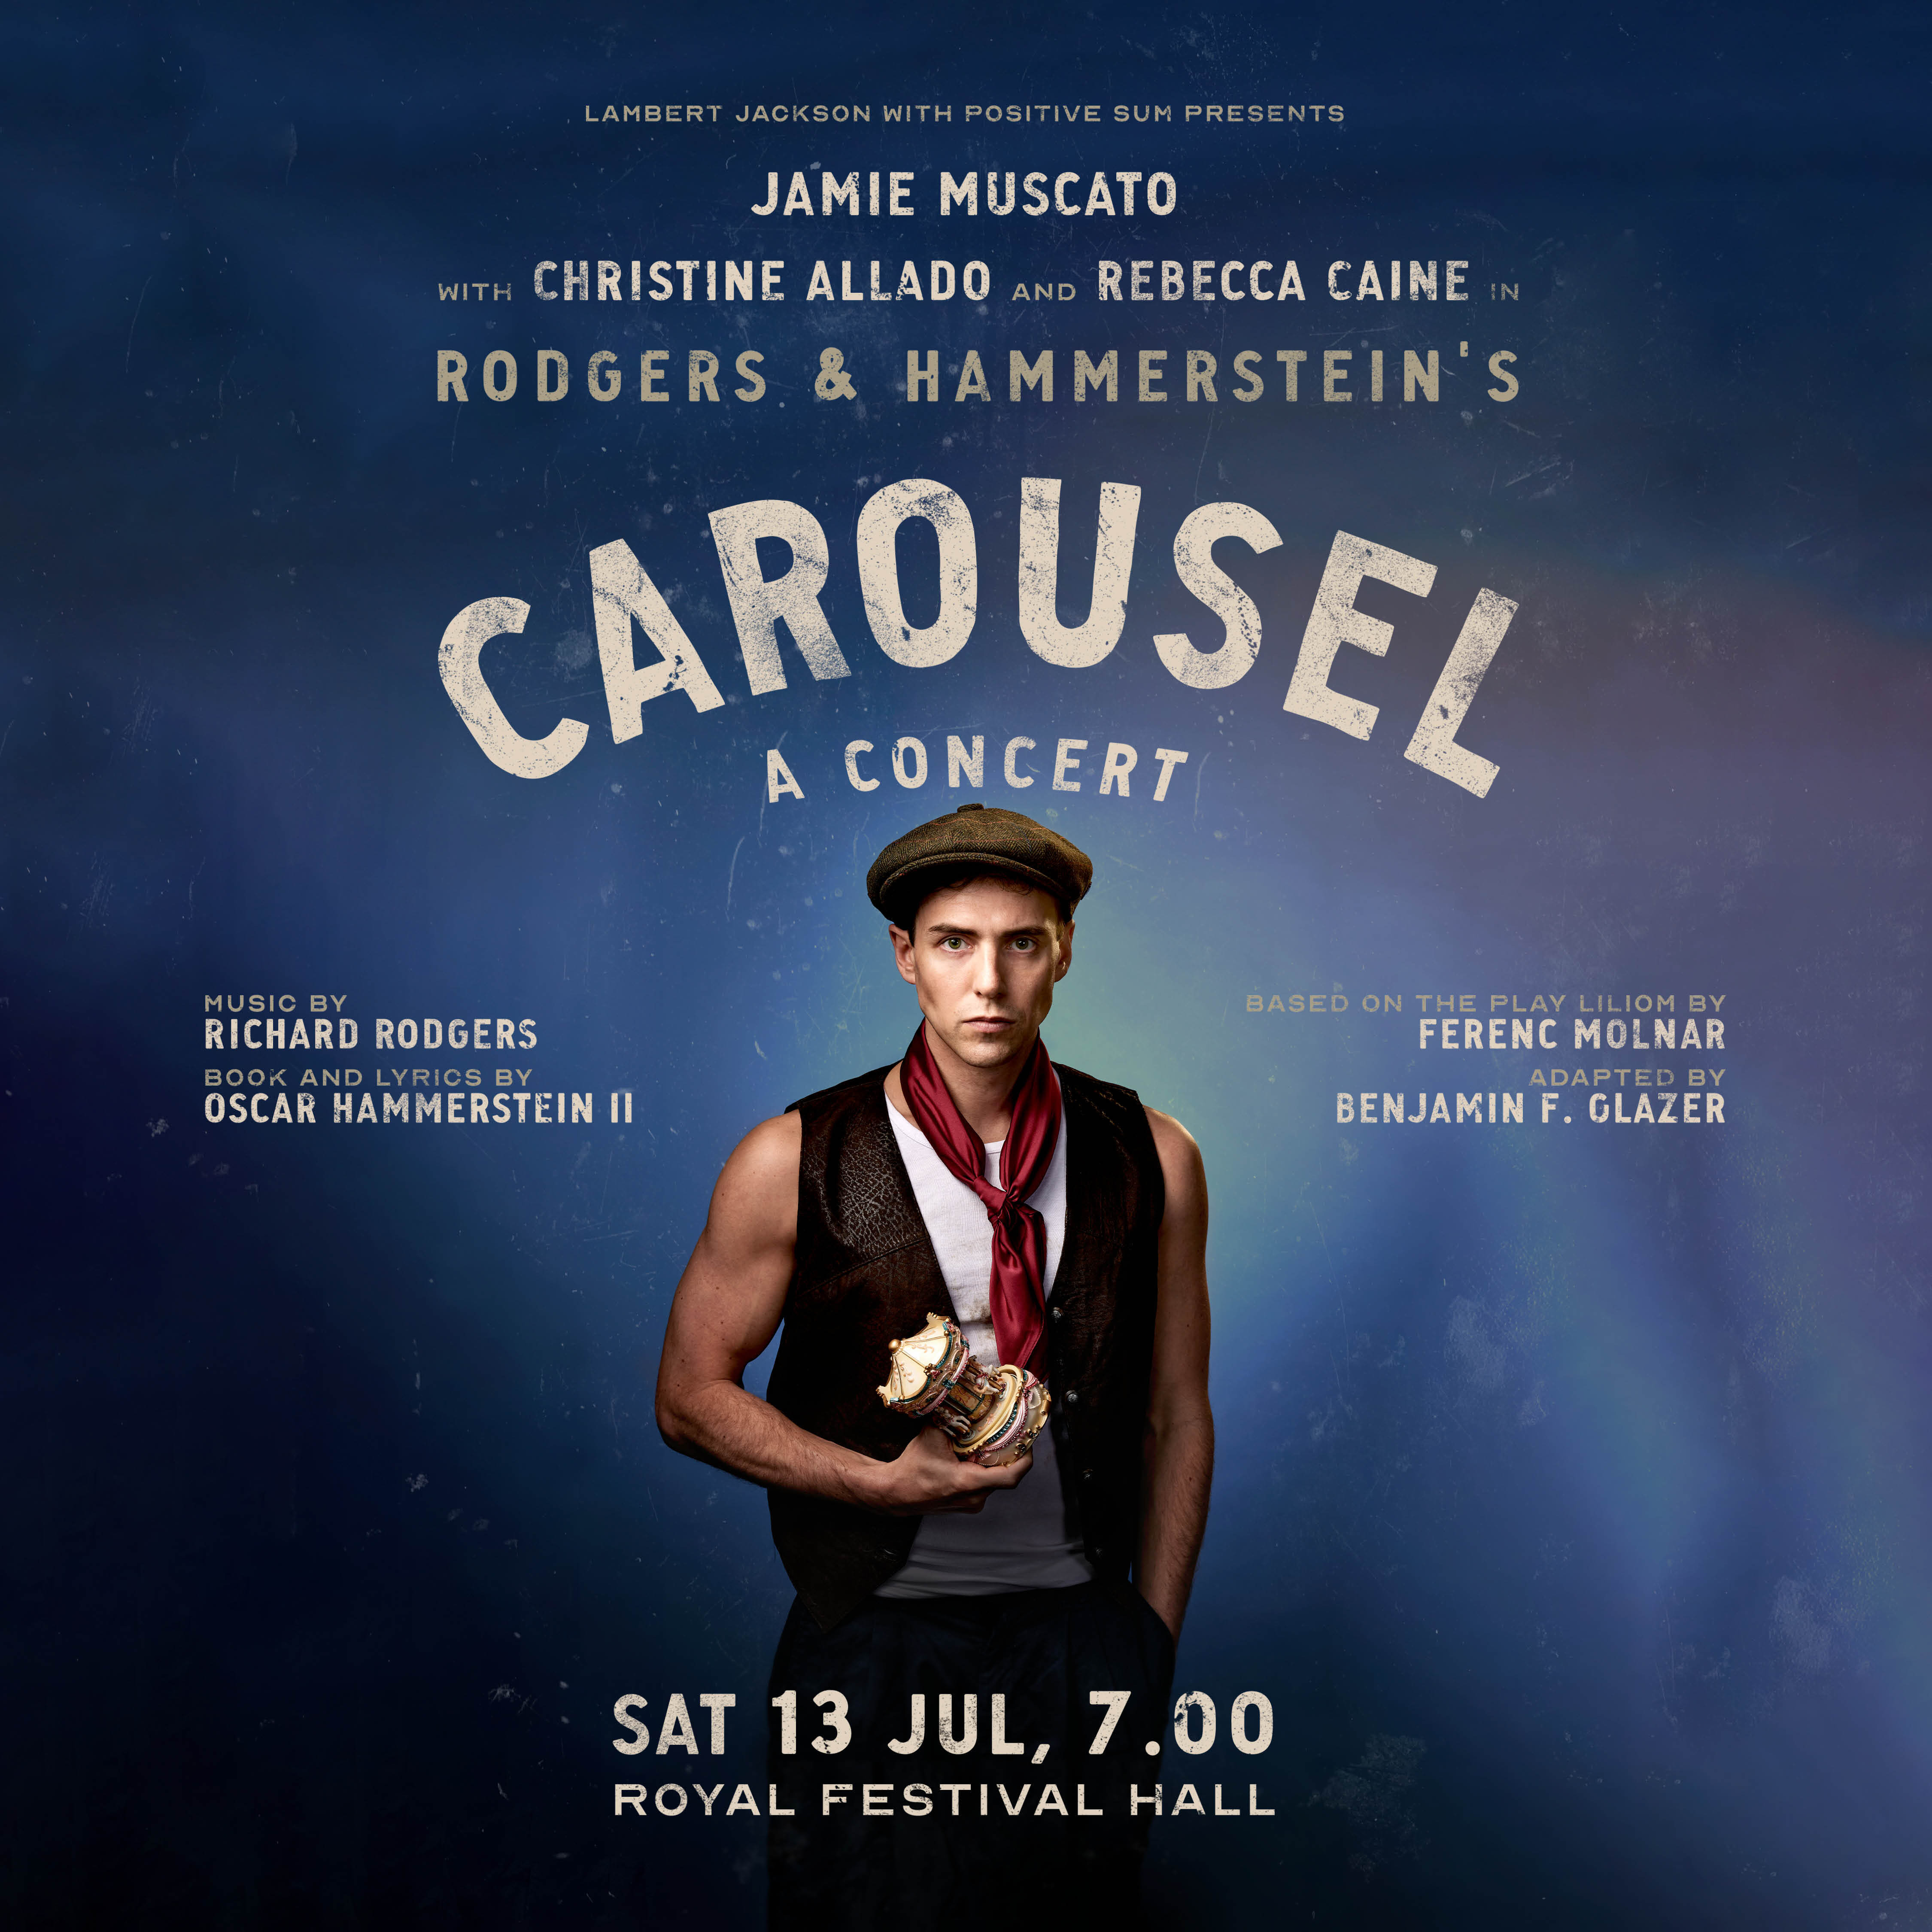 Rodgers and Hammerstein's Carousel: a Concert photo from the show